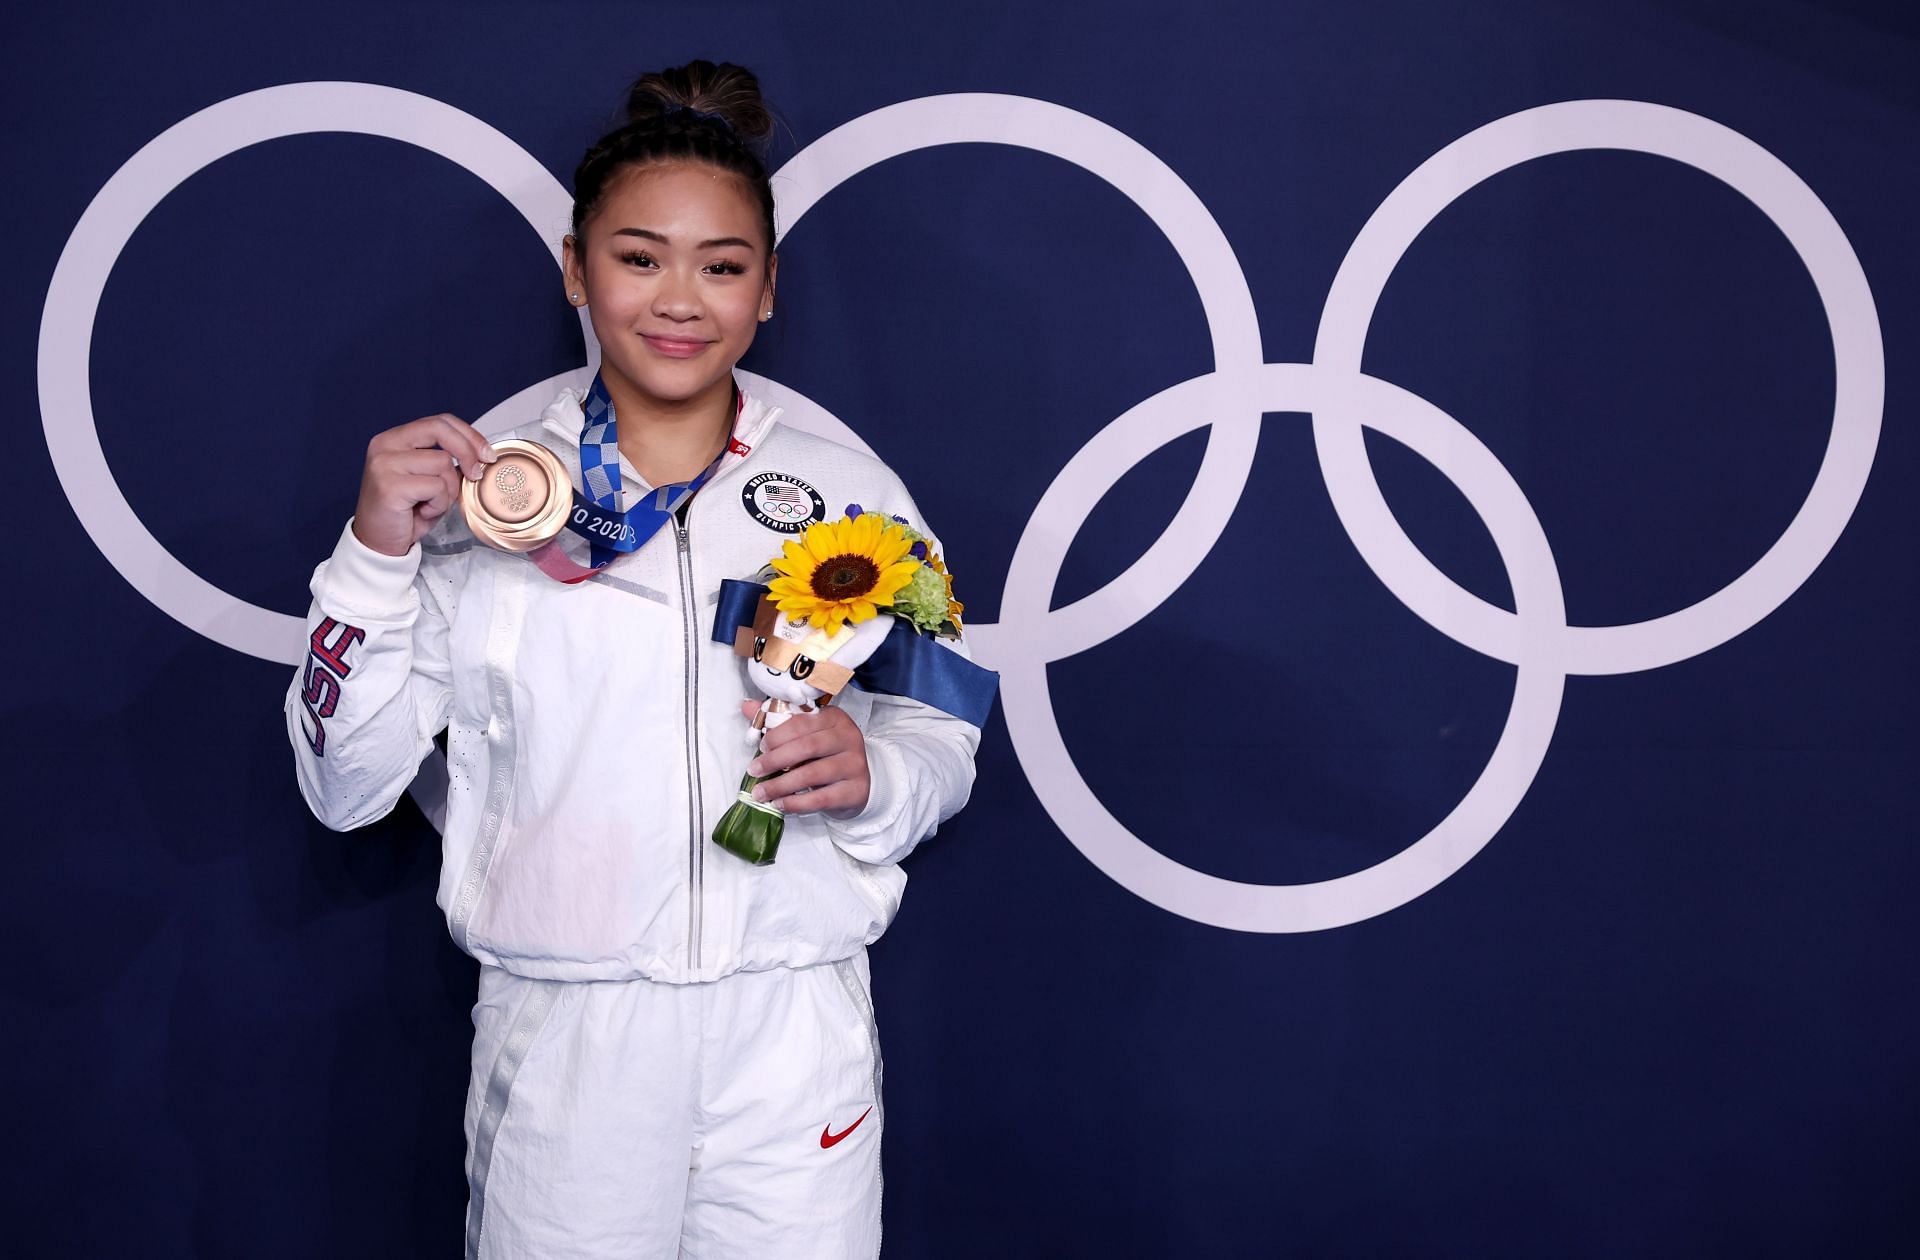 Suni Lee during the Tokyo 2020 Olympics